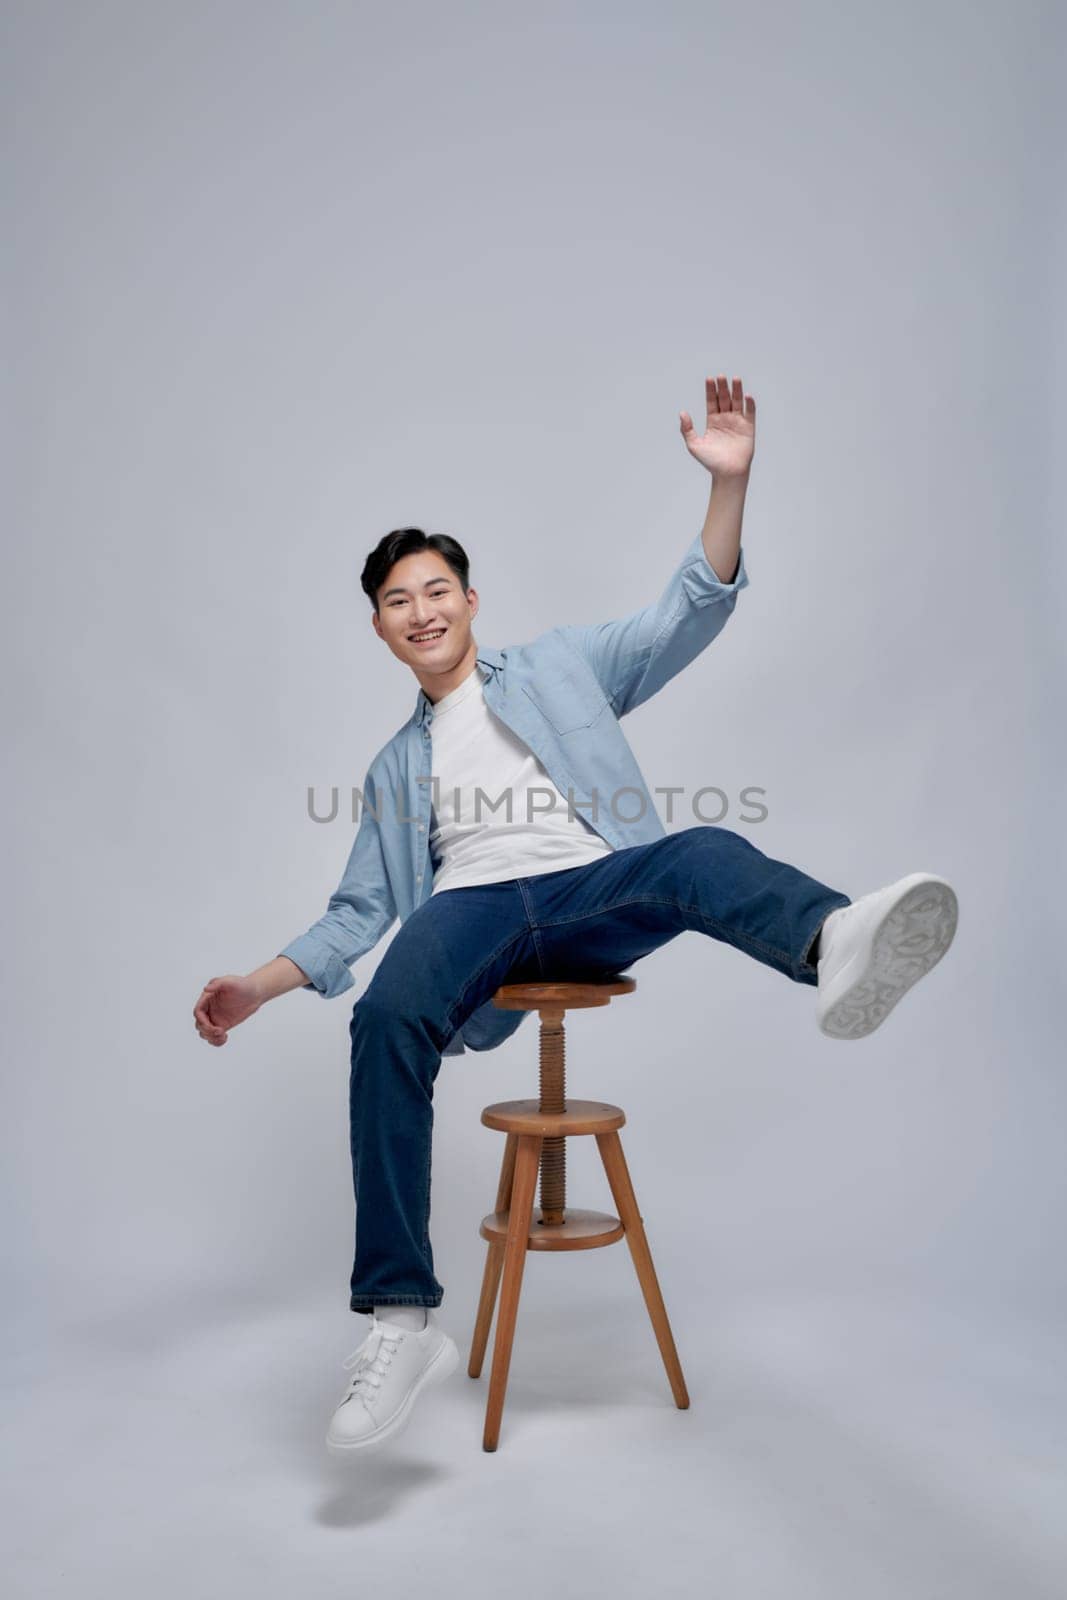 Full body cadre of young funky guy sitting chair friendly want hugs have fun meet colleagues